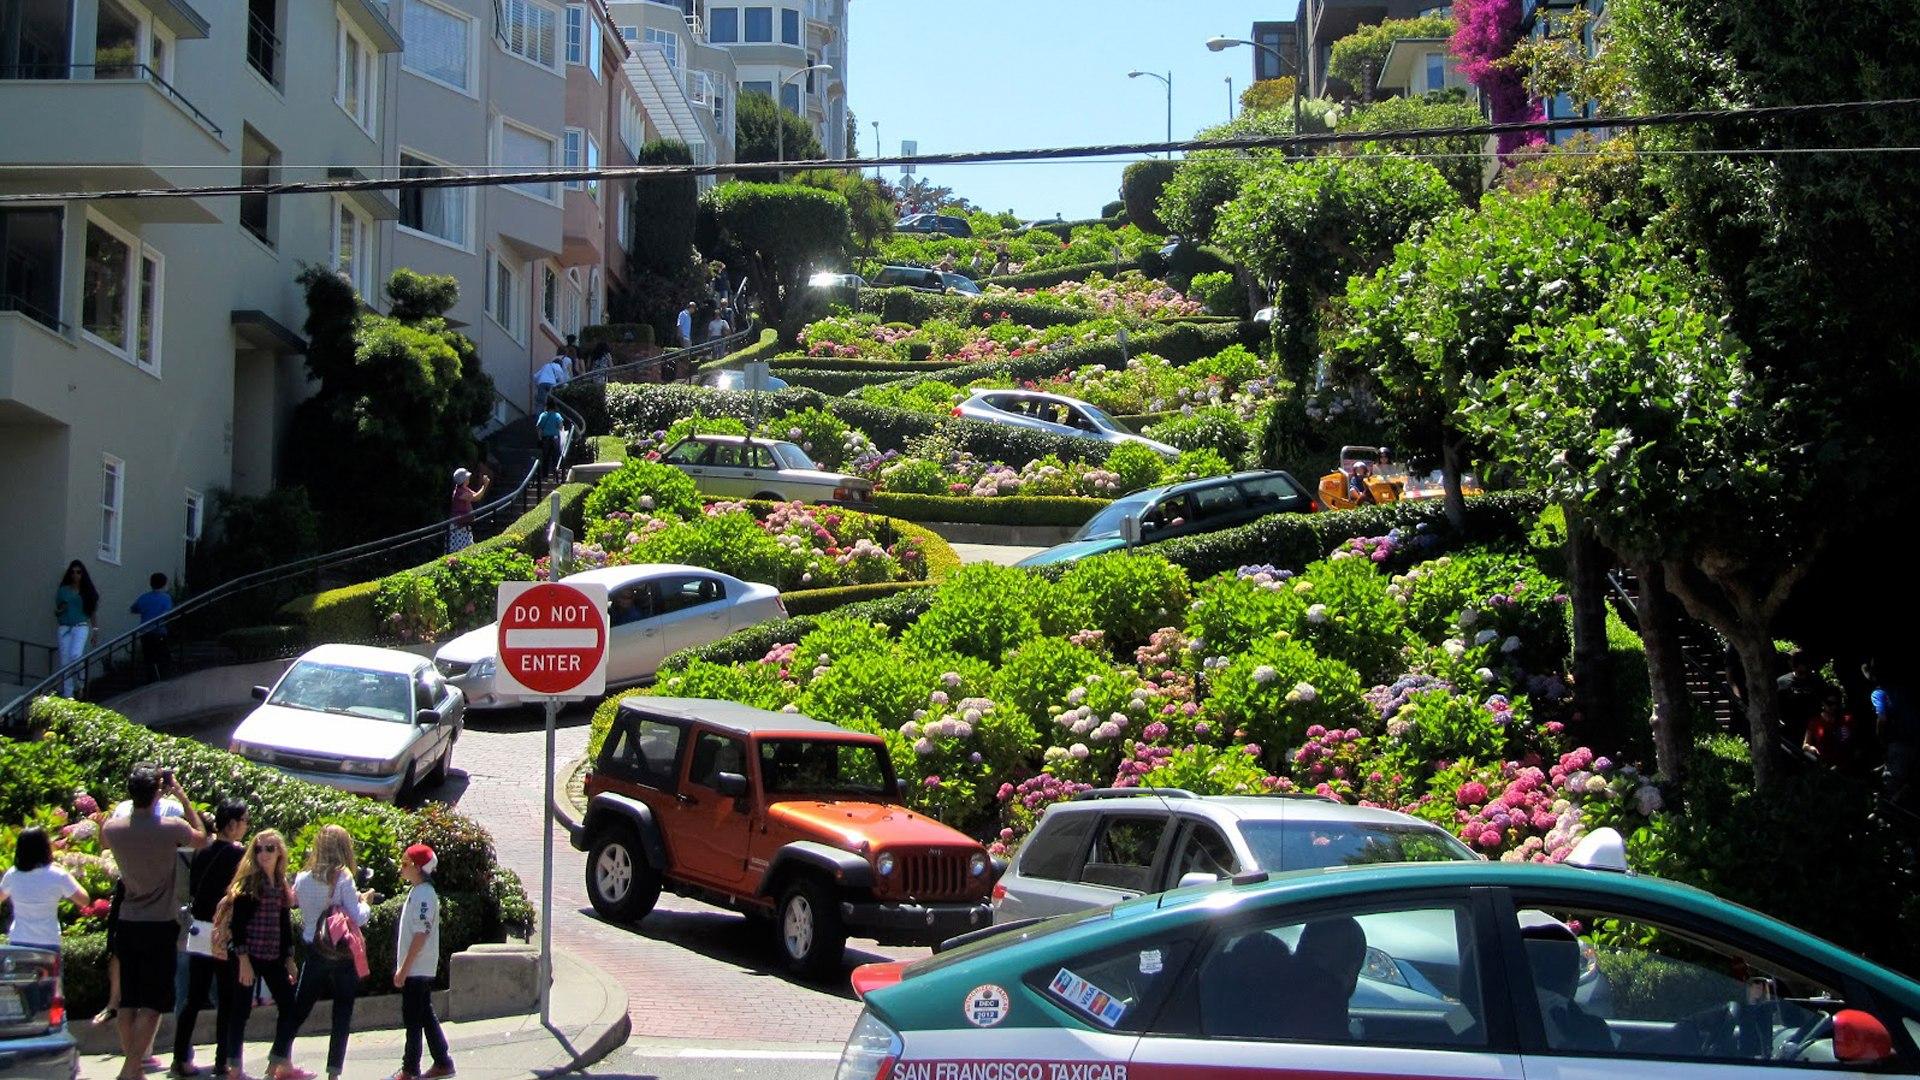 Lombard Street in San Francisco wallpaper and image